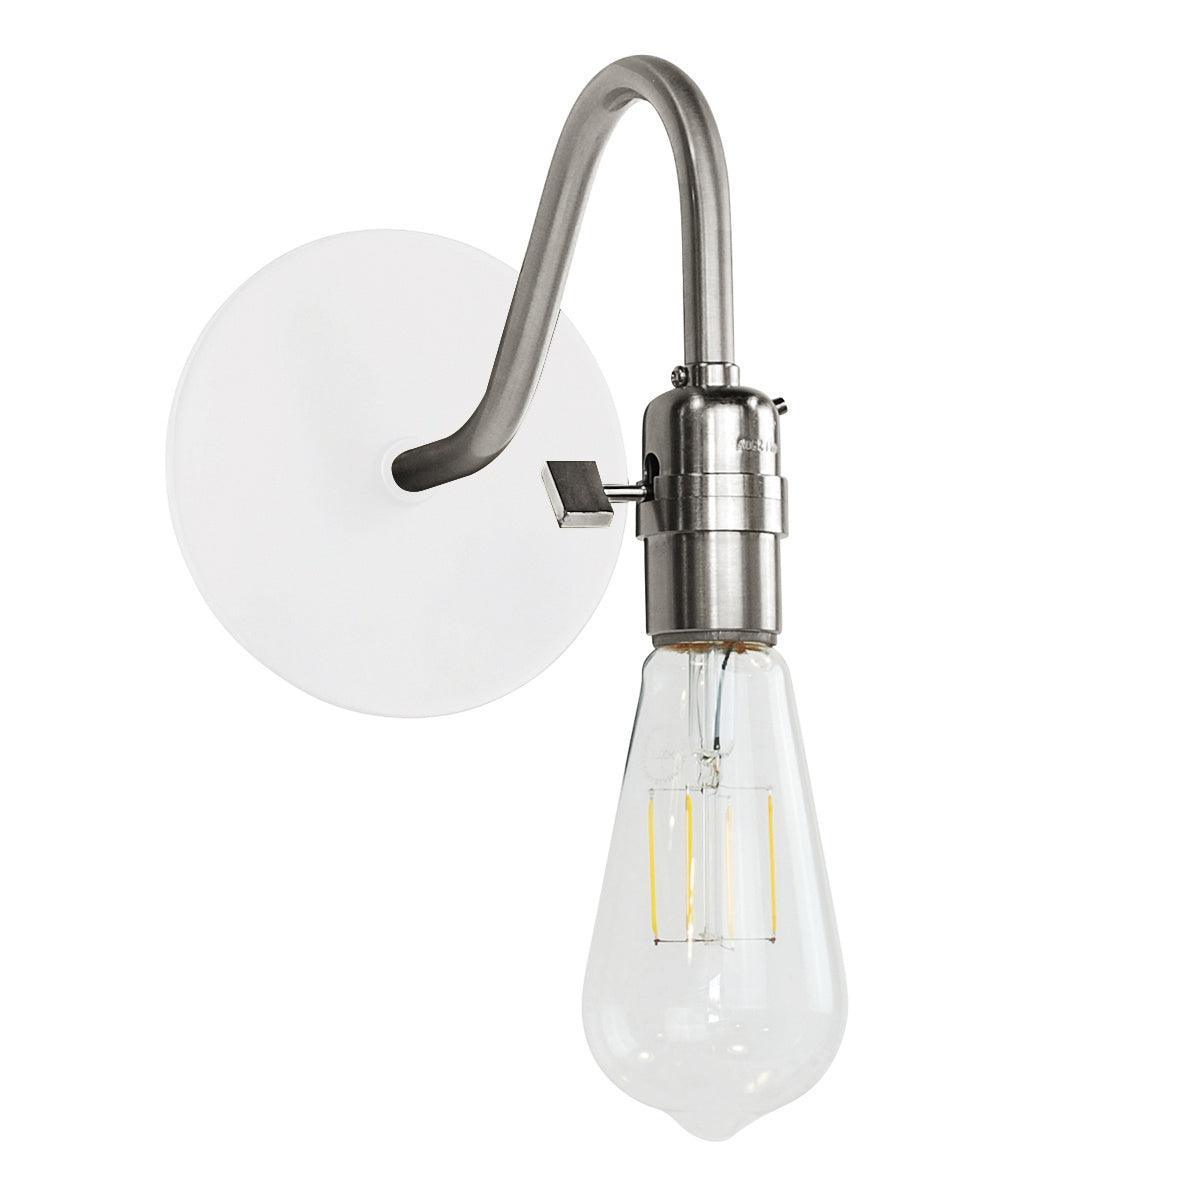 Montclair Light Works - Uno SCL400 Wall Sconce - SCL400-44-96 | Montreal Lighting & Hardware